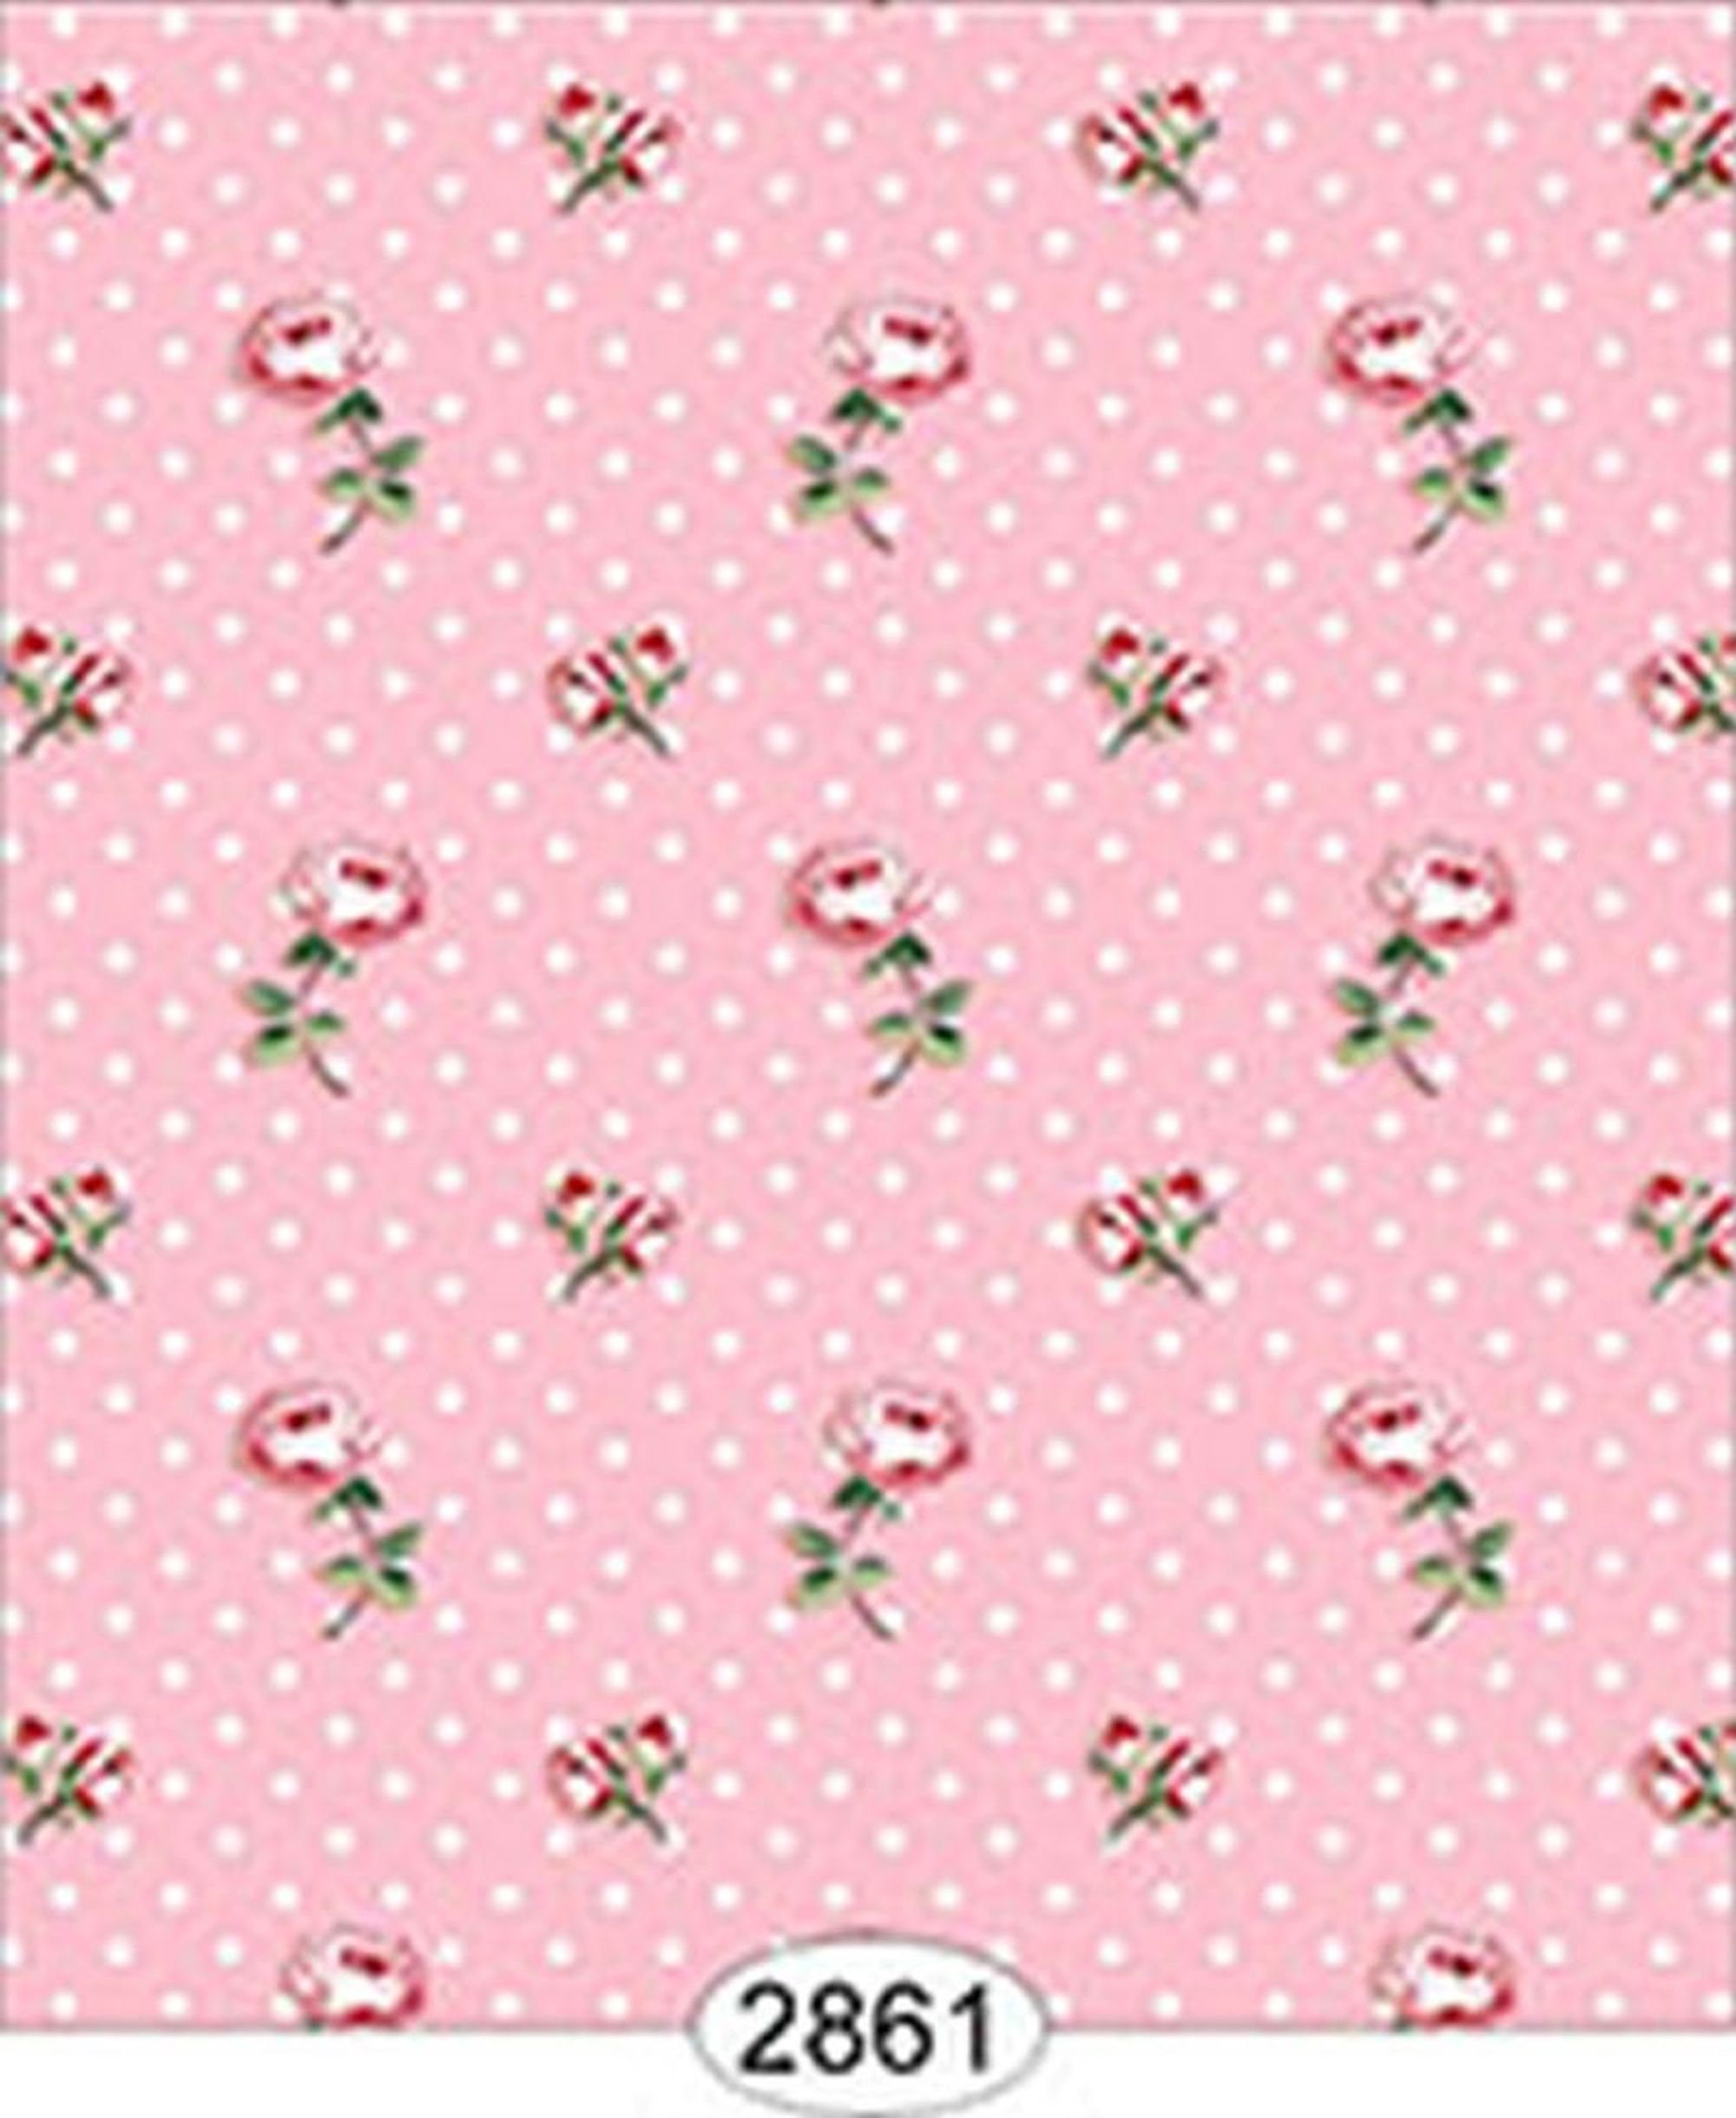 Dollhouse Wallpaper Cottage Chic Toss on Pink - Etsy